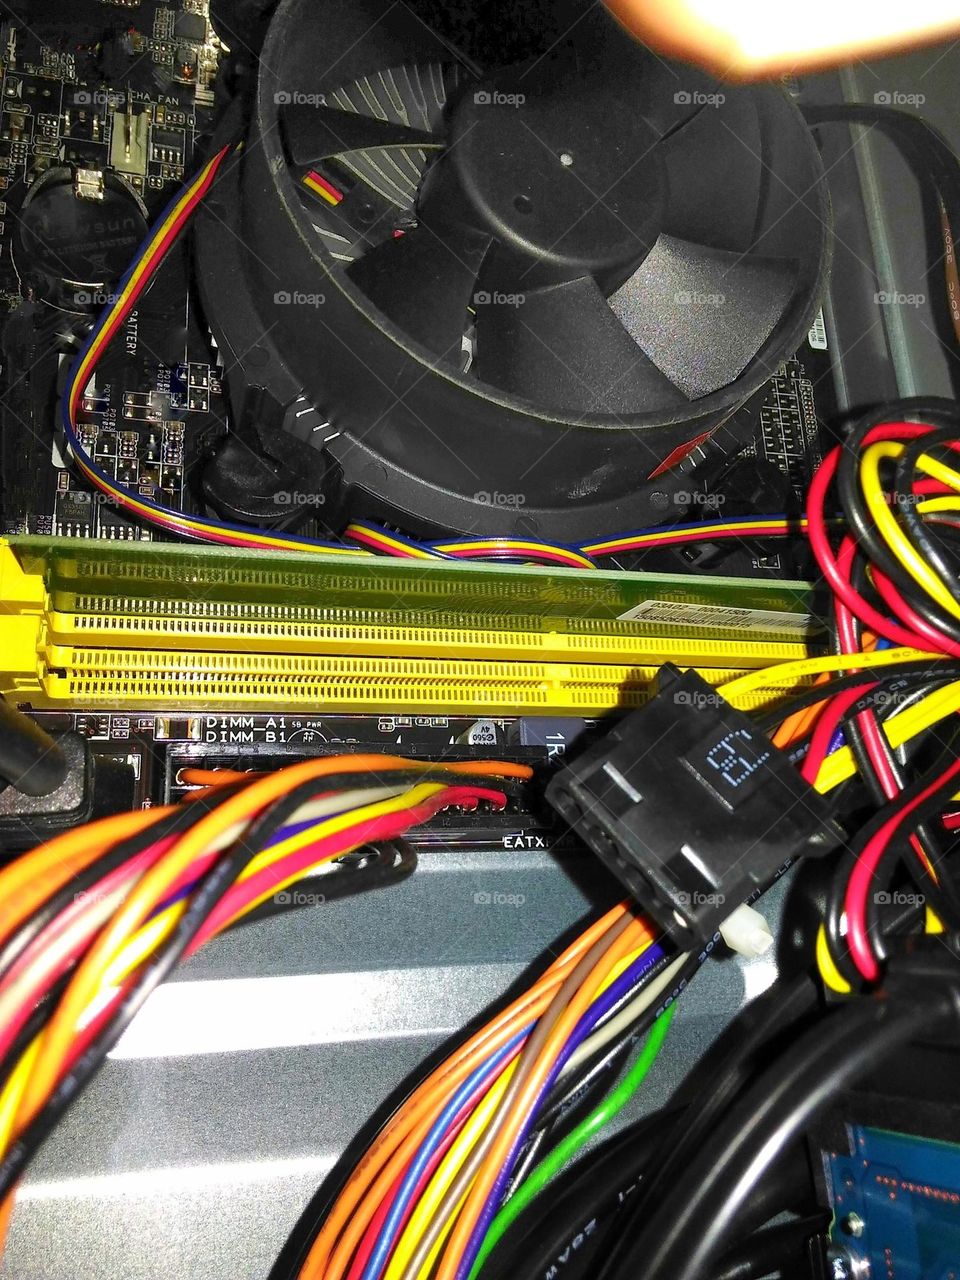 Some cables, cooling fans and parts of the mainboard in a computer